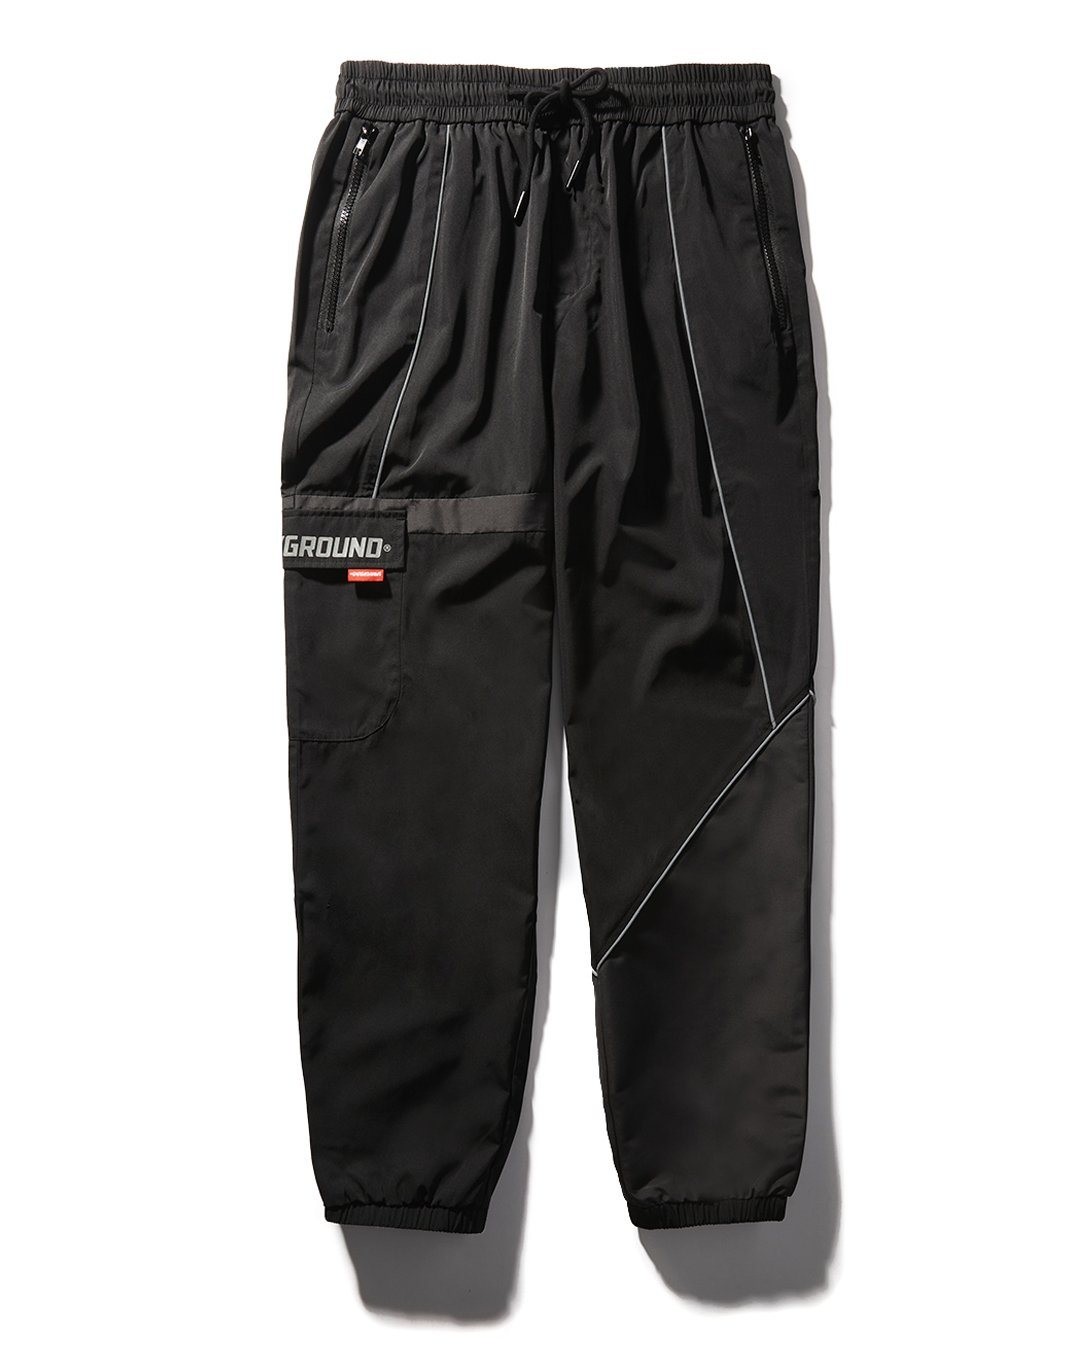 HOT SALE ☆☆☆ CHILL PILL TRACK PANTS - HOT SALE ☆☆☆ CHILL PILL TRACK PANTS-31